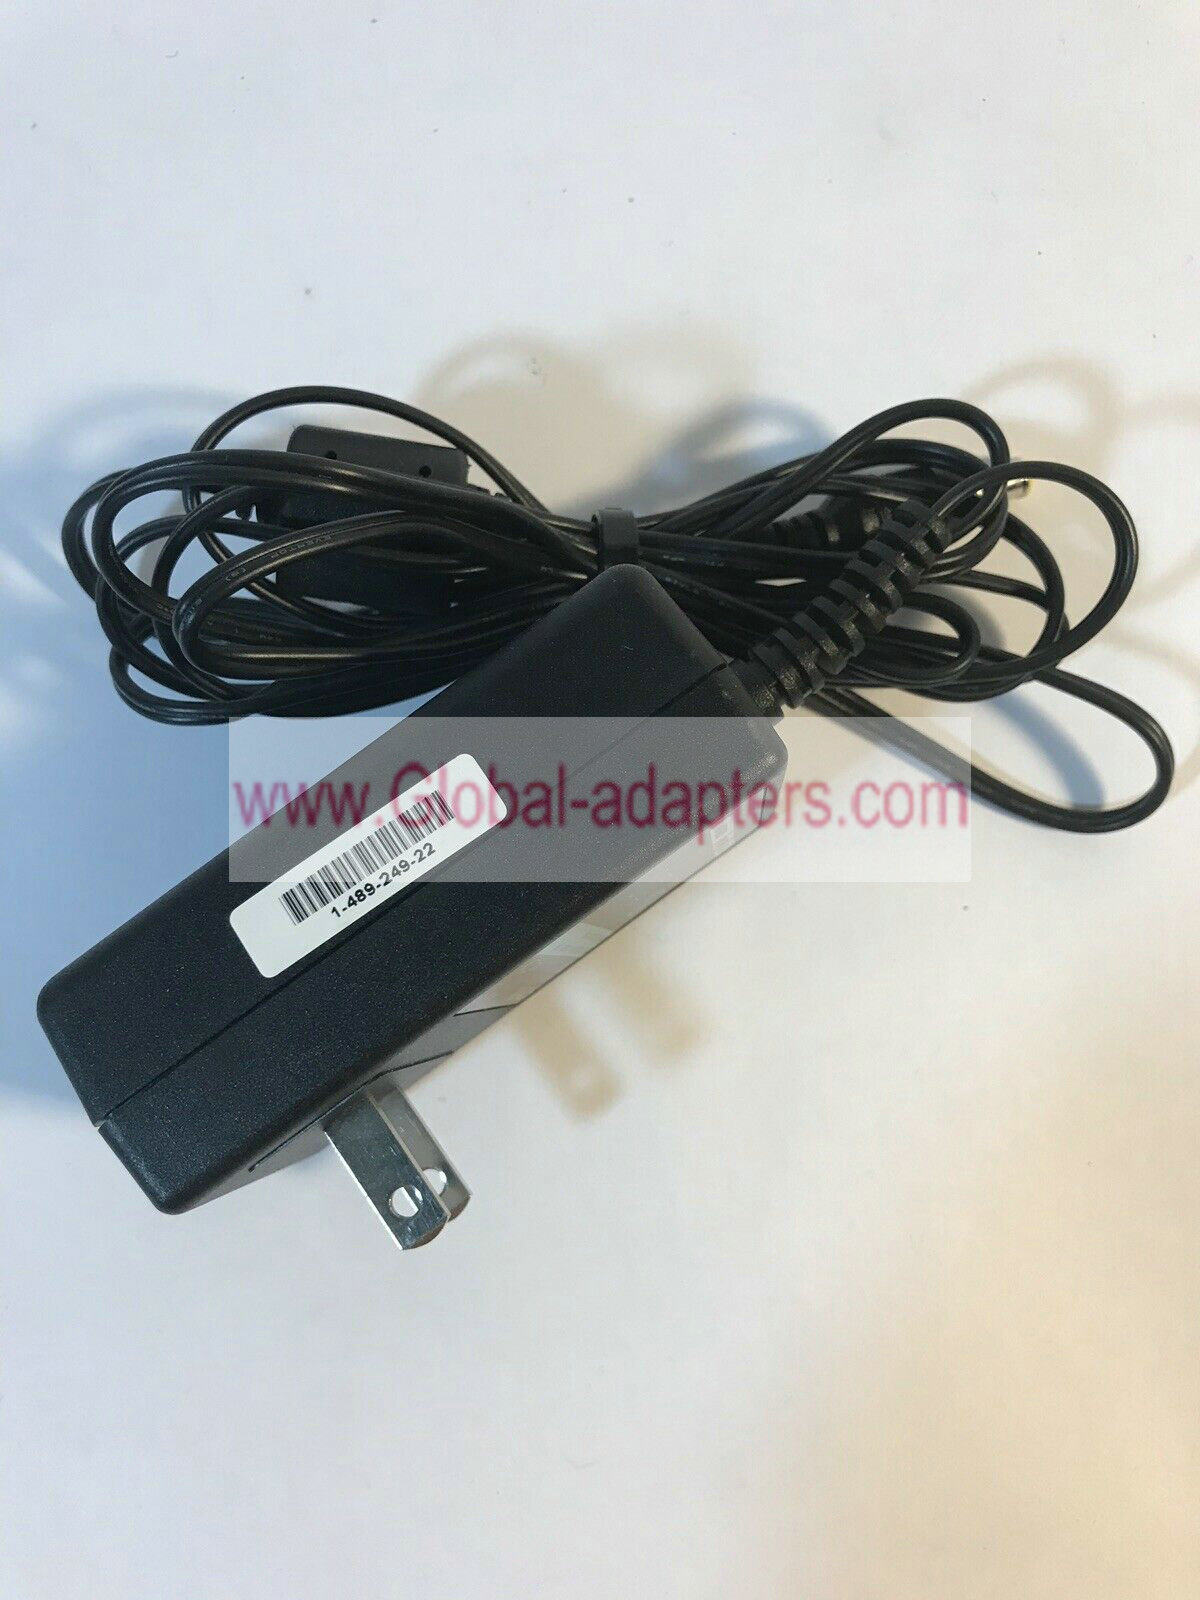 New Sony AC-E1215 12V 1.5A Power Supply AC Adapter Charger Cord for SRS-D4 Speakers